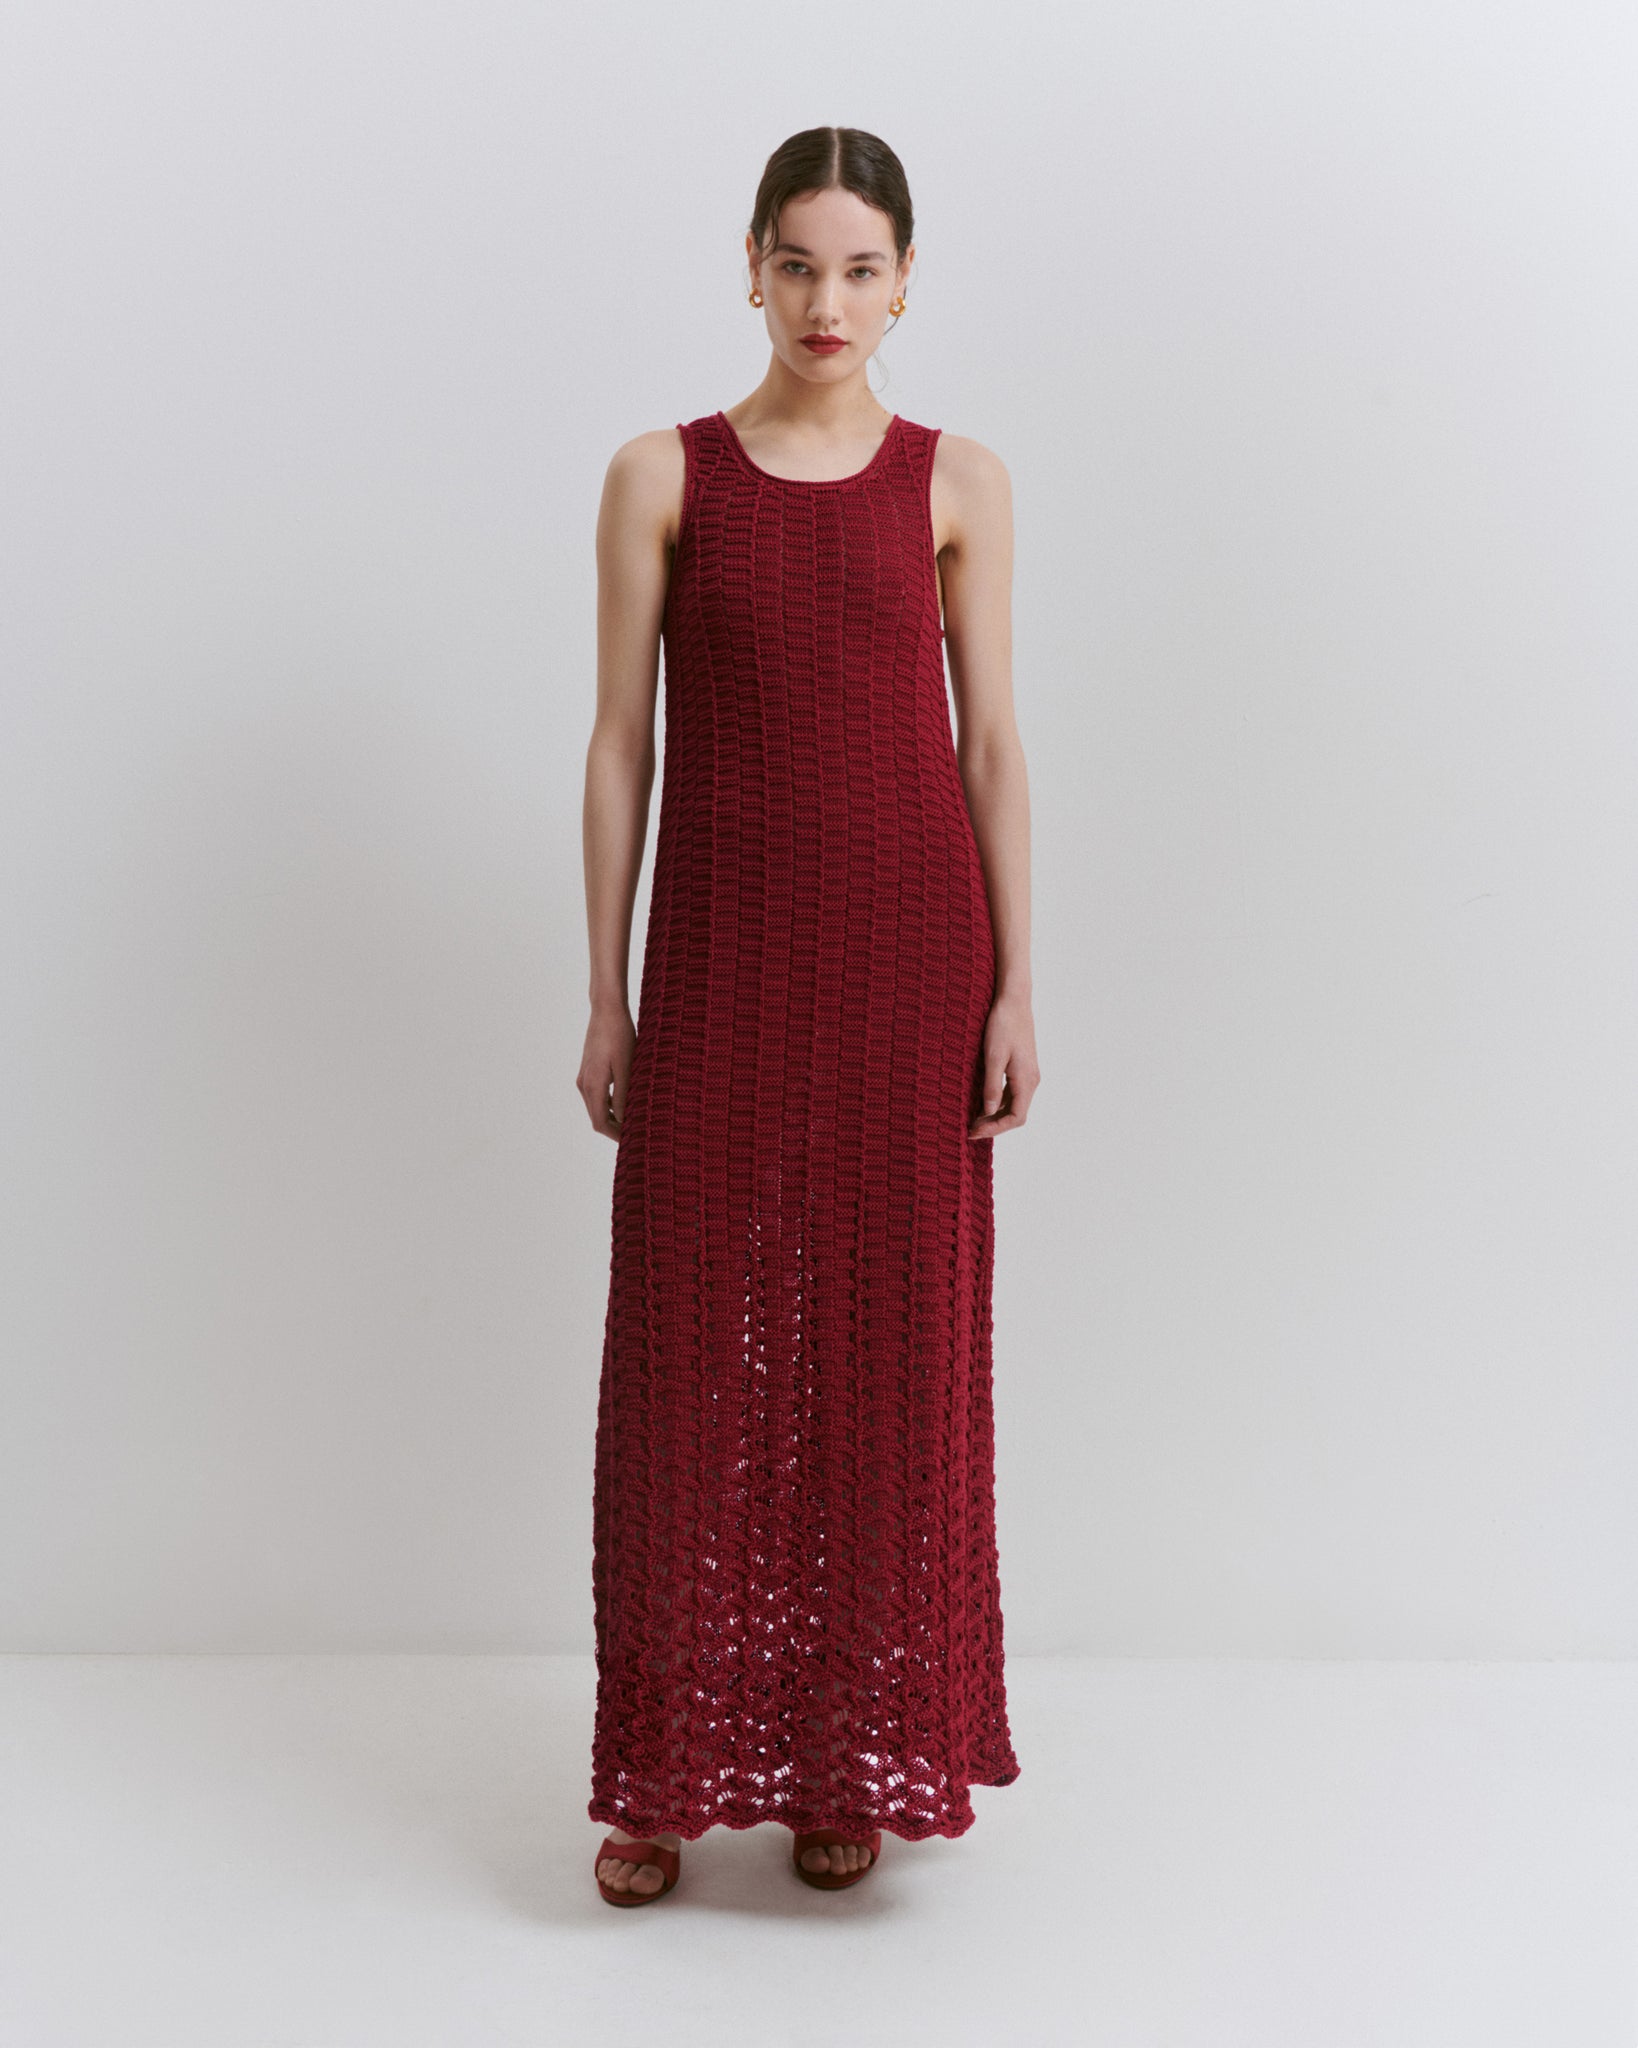 Model wears Issue Twelve Edie knitted cotton red dress